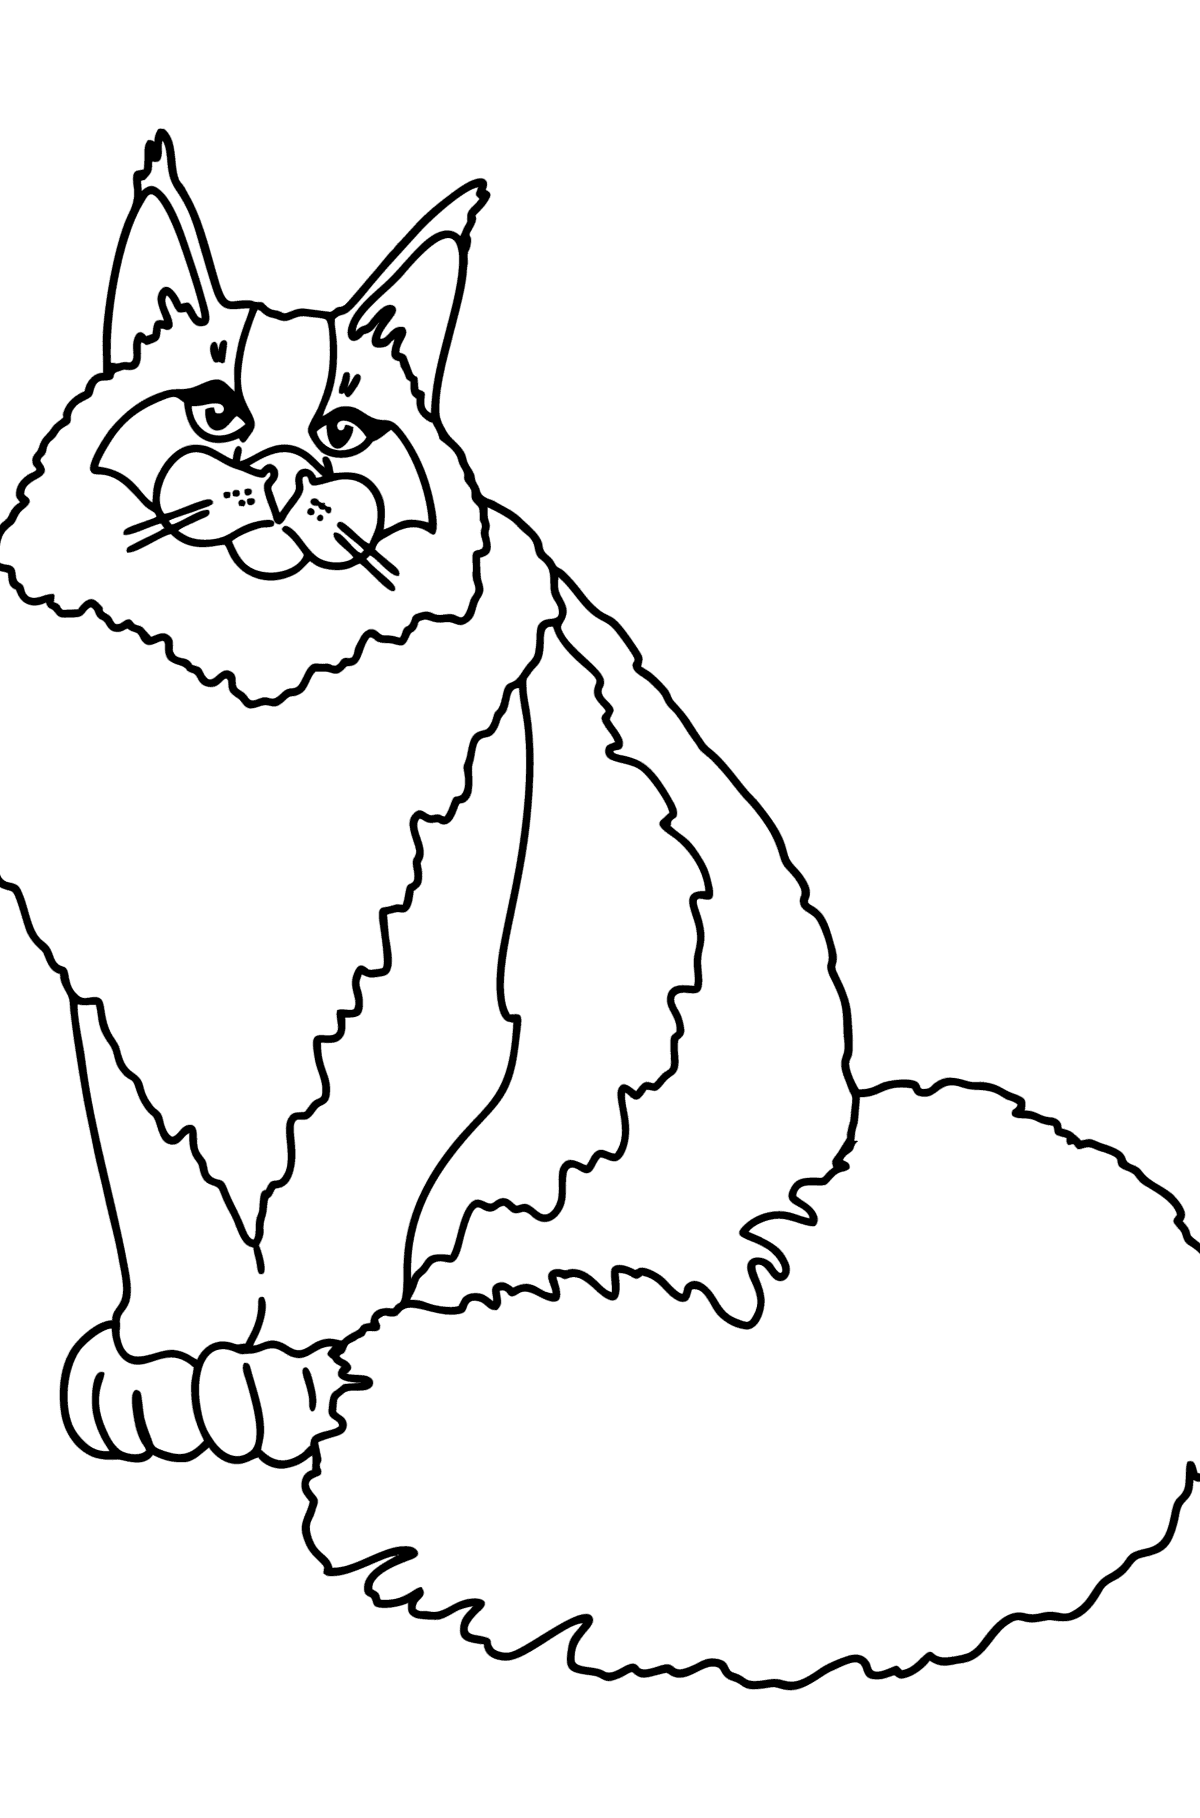 Maine Coon Cat coloring page - Coloring Pages for Kids